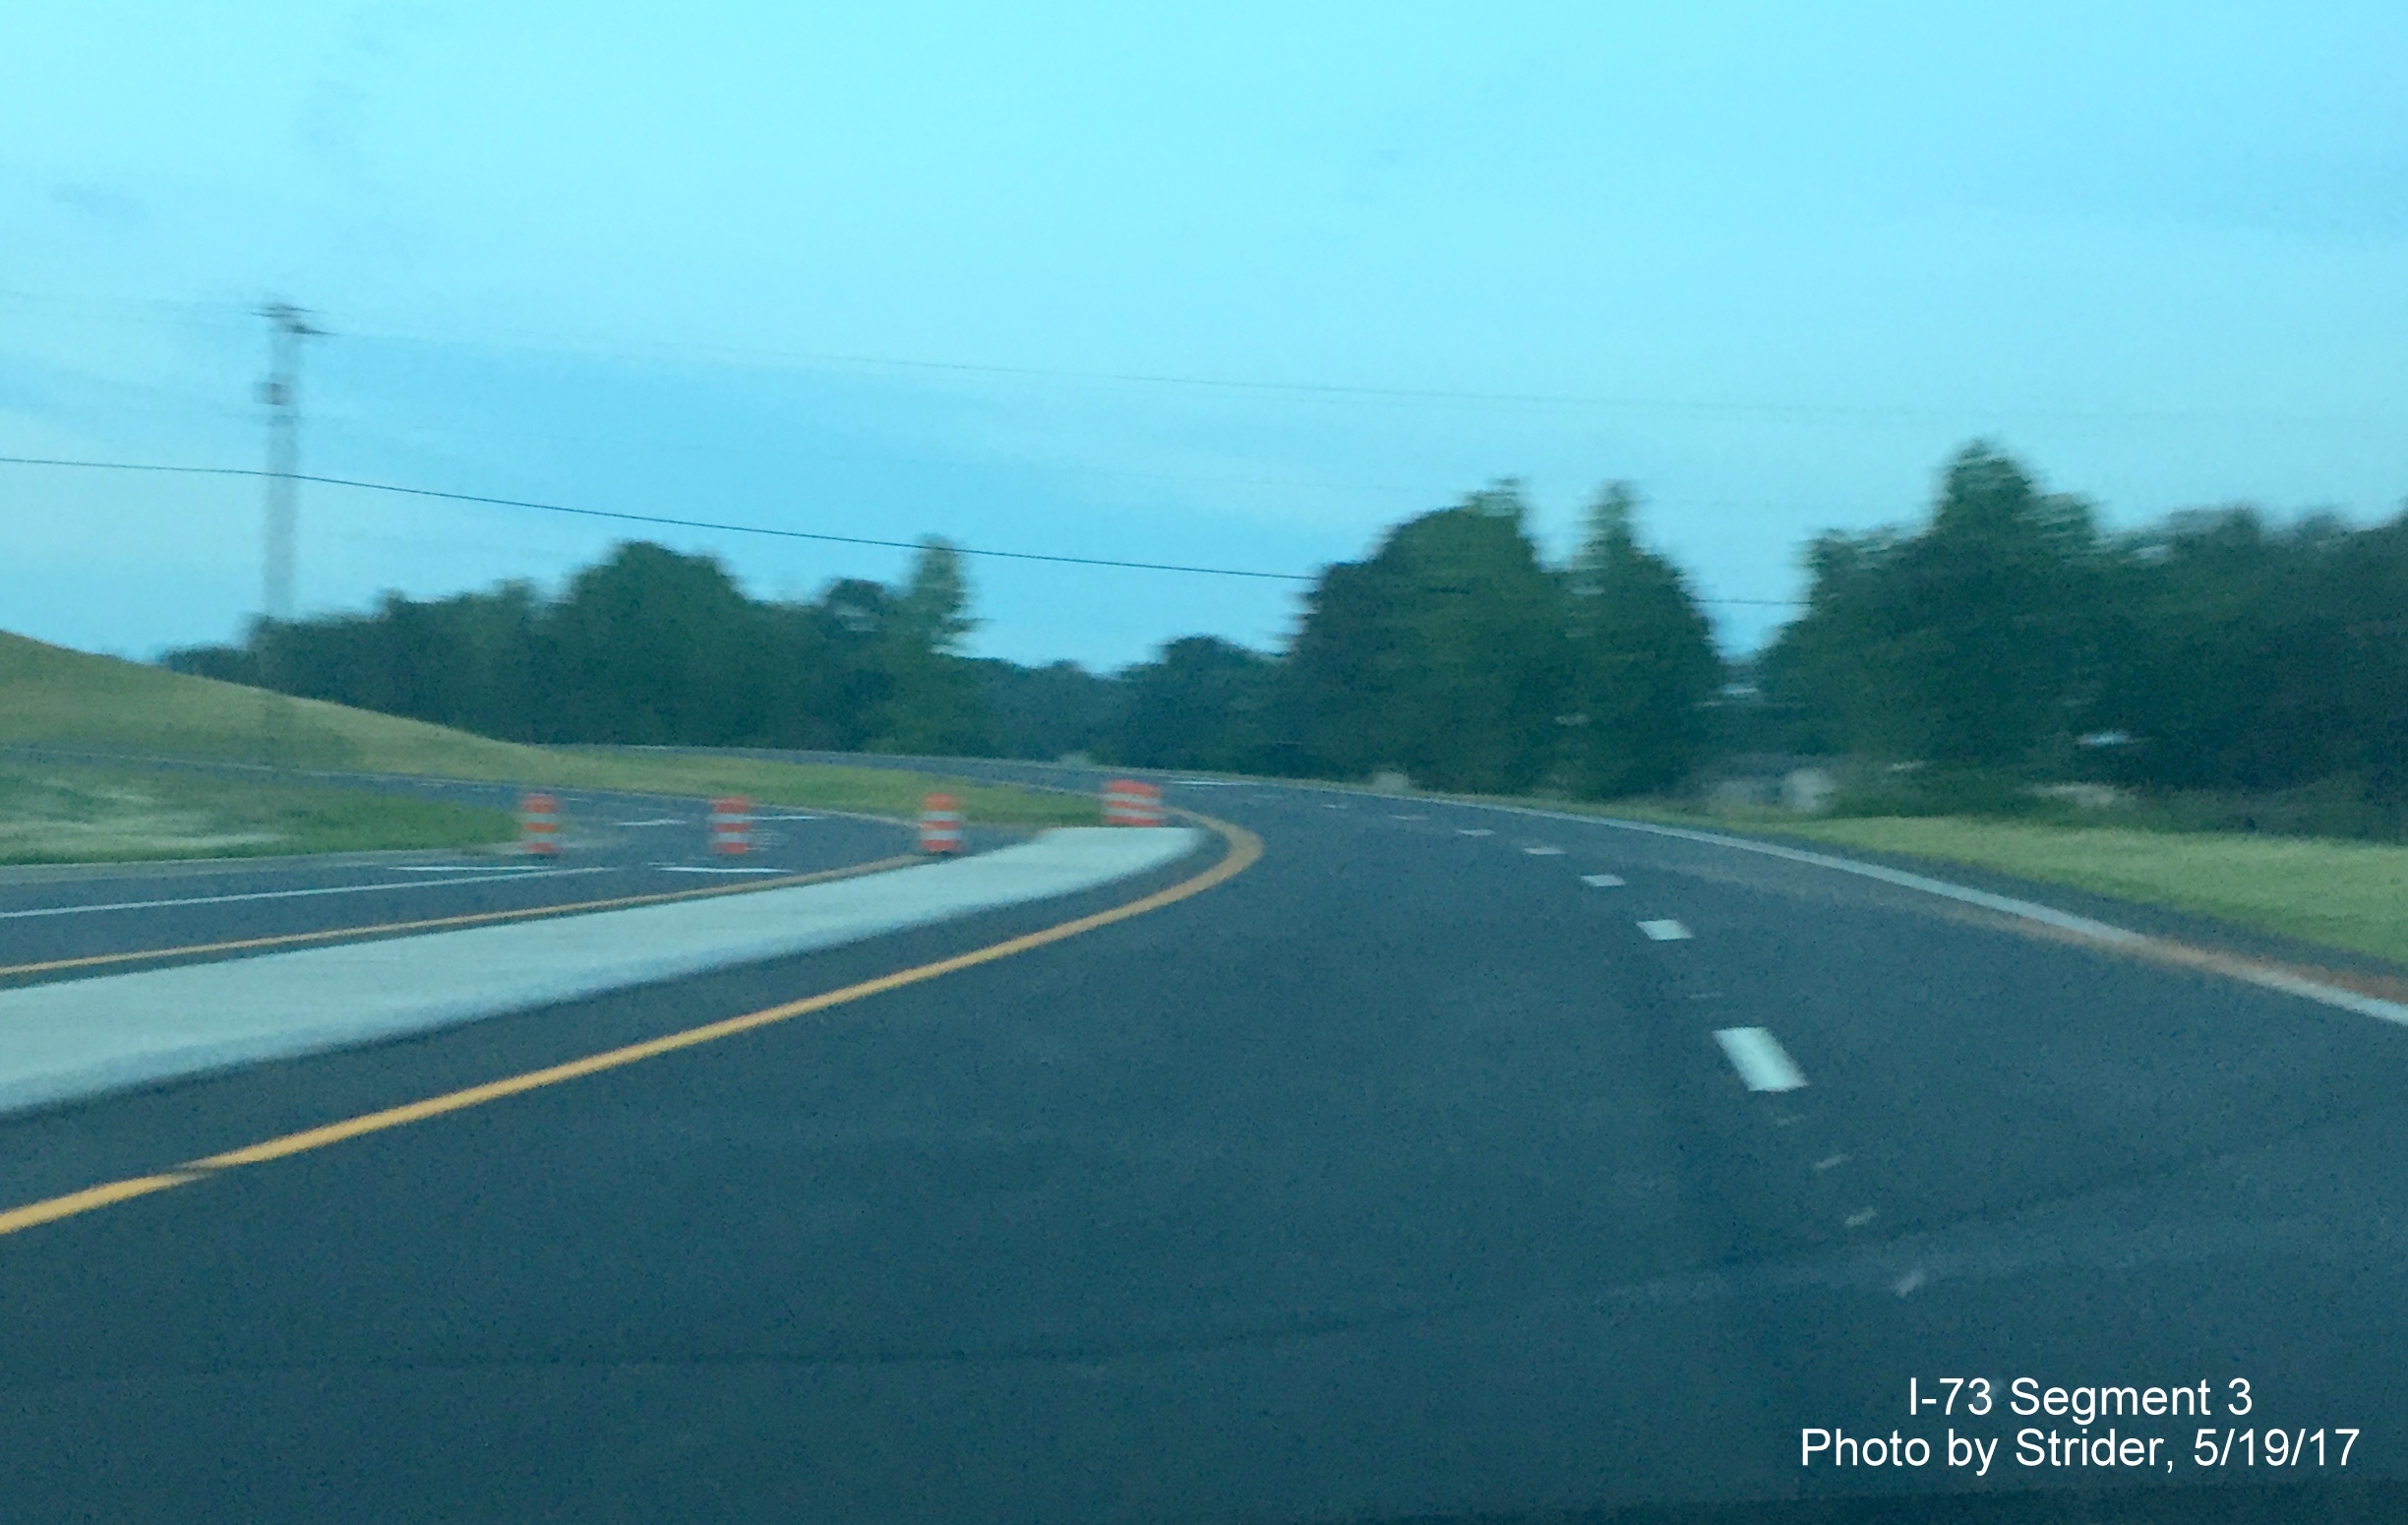 Image taken of view on ramp from NC 68 North to the newly opened I-73 North, by Strider